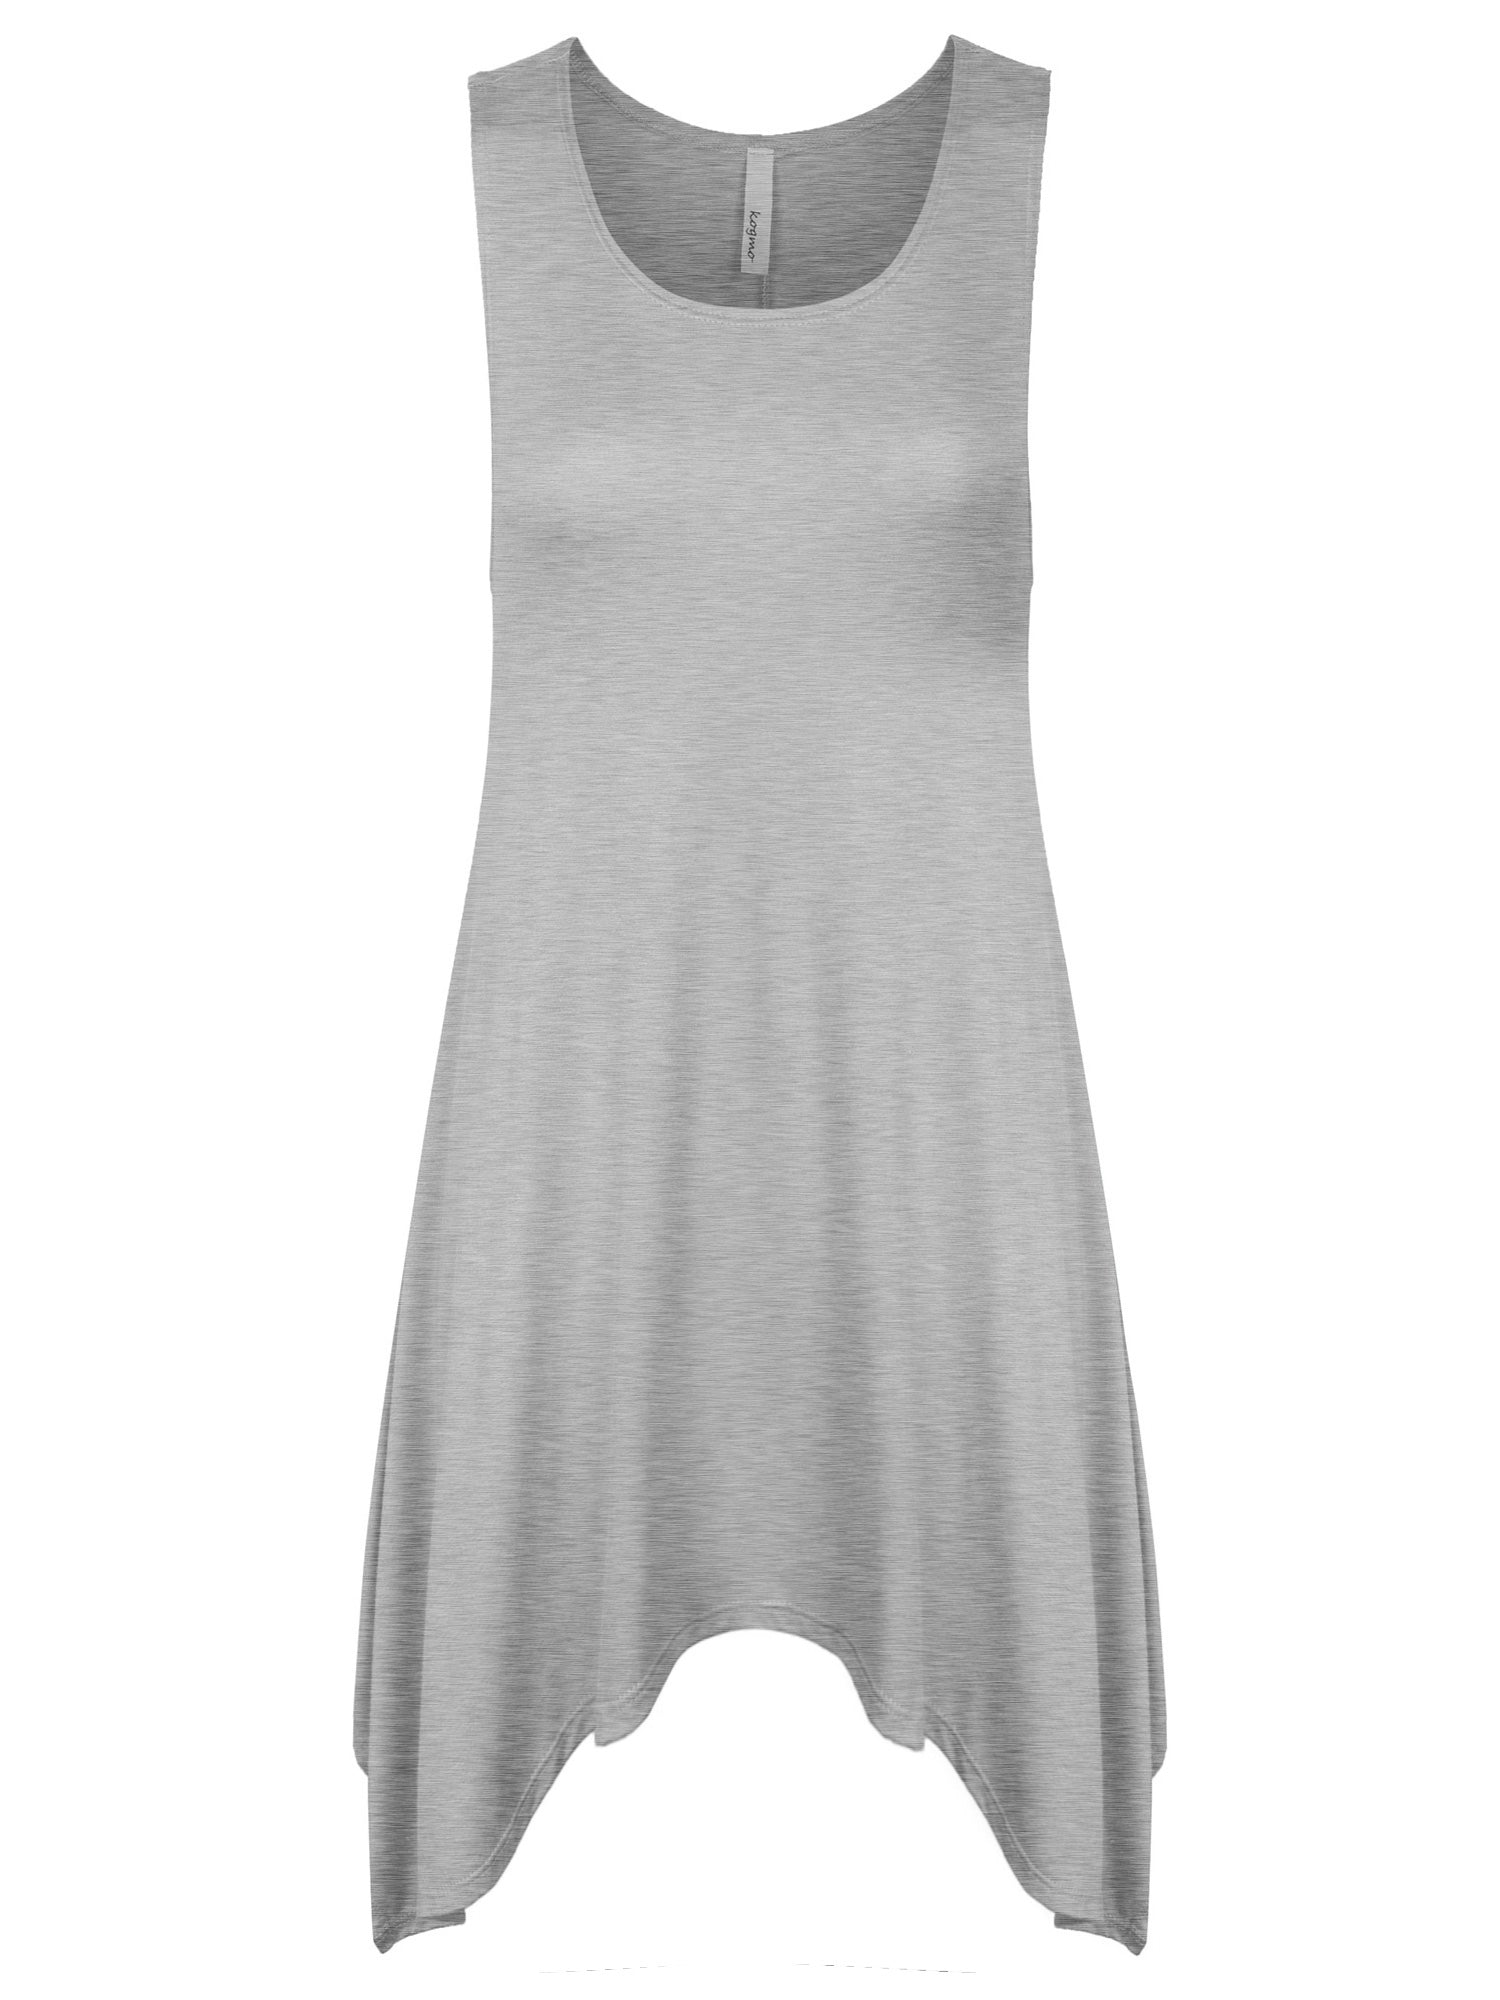 Clearance] Women's Plain Long Cami Tank Top with Adjustable